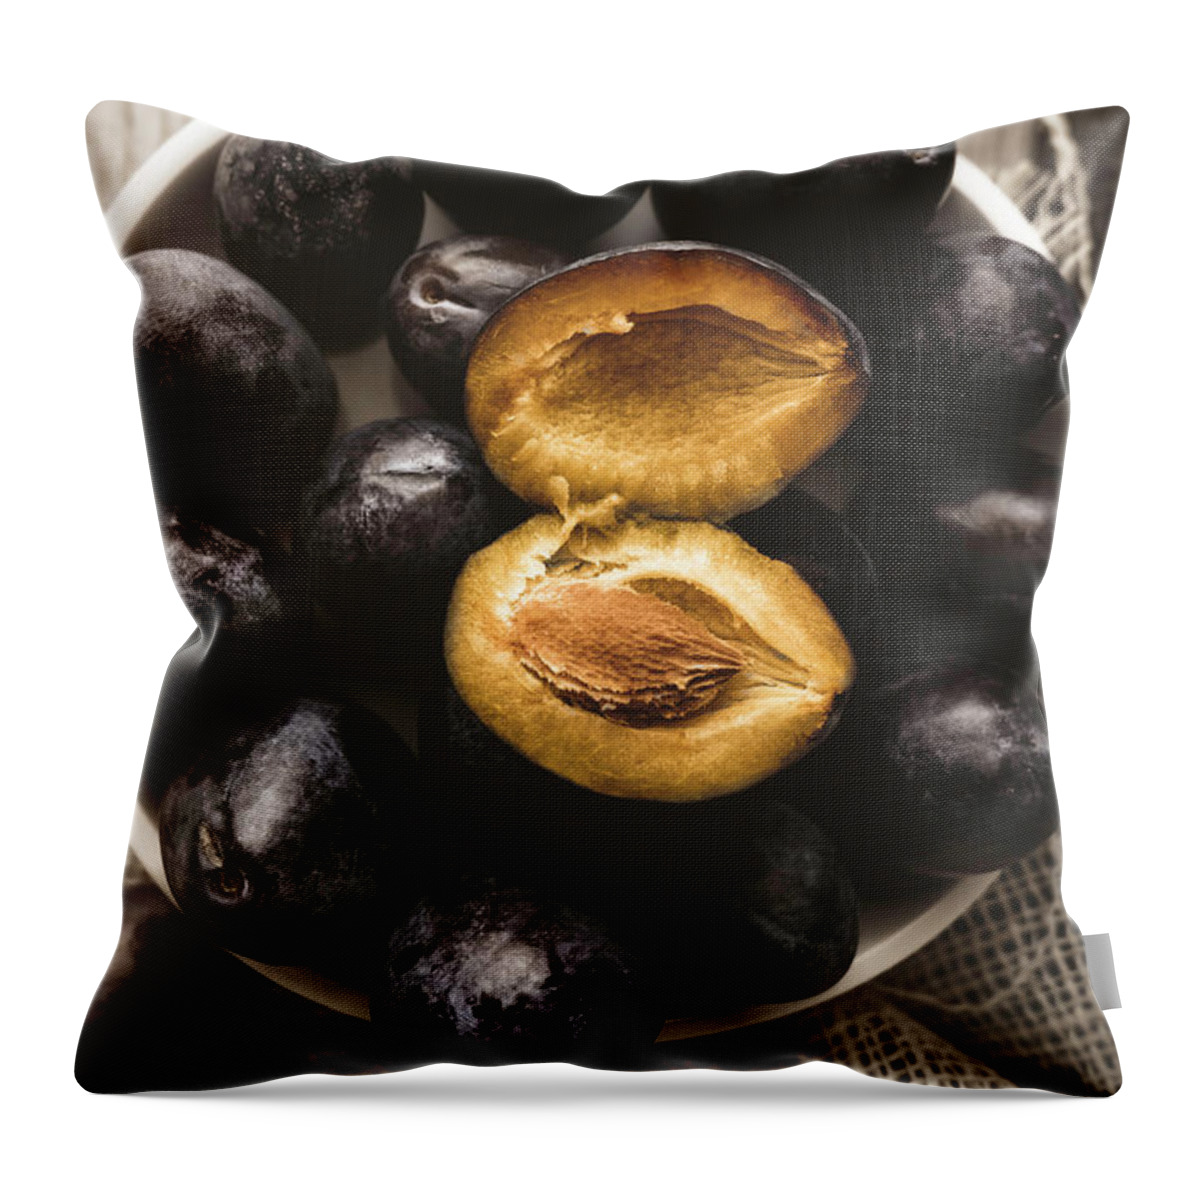 Still-life Food Throw Pillow featuring the photograph ... Susine ... by Enrico Sottocorna